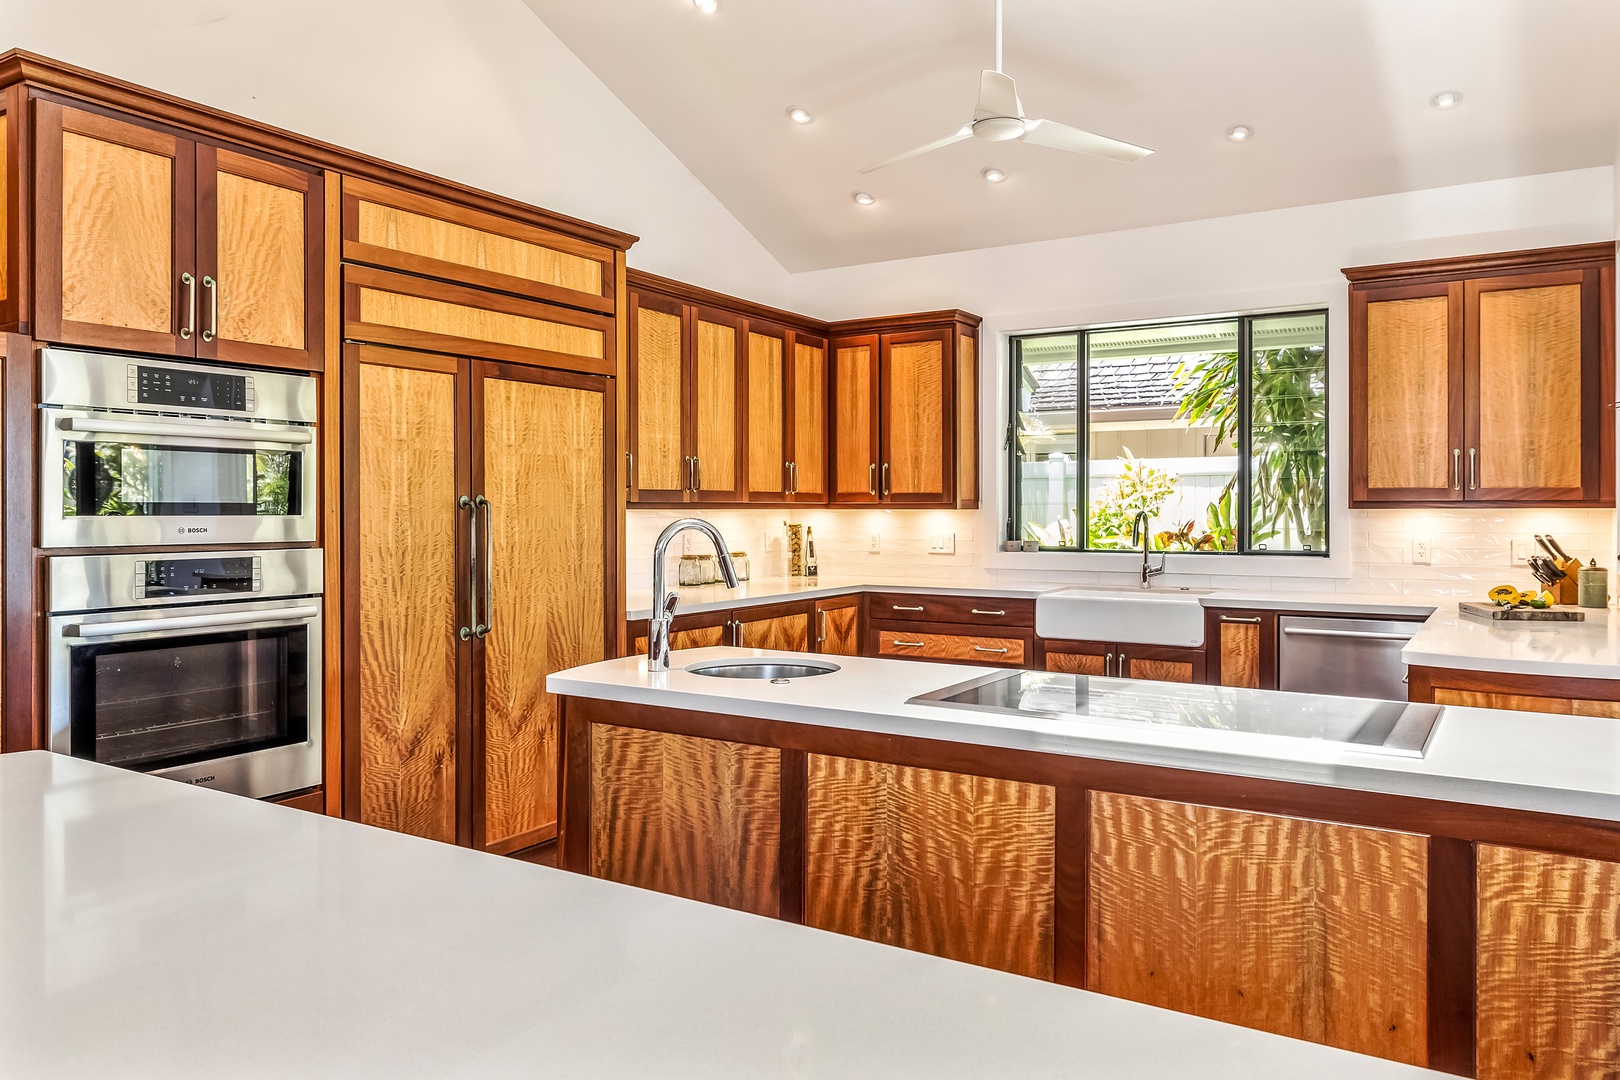 Kailua Vacation Rentals, Hale Ohana - The kitchen features stainless steel appliances